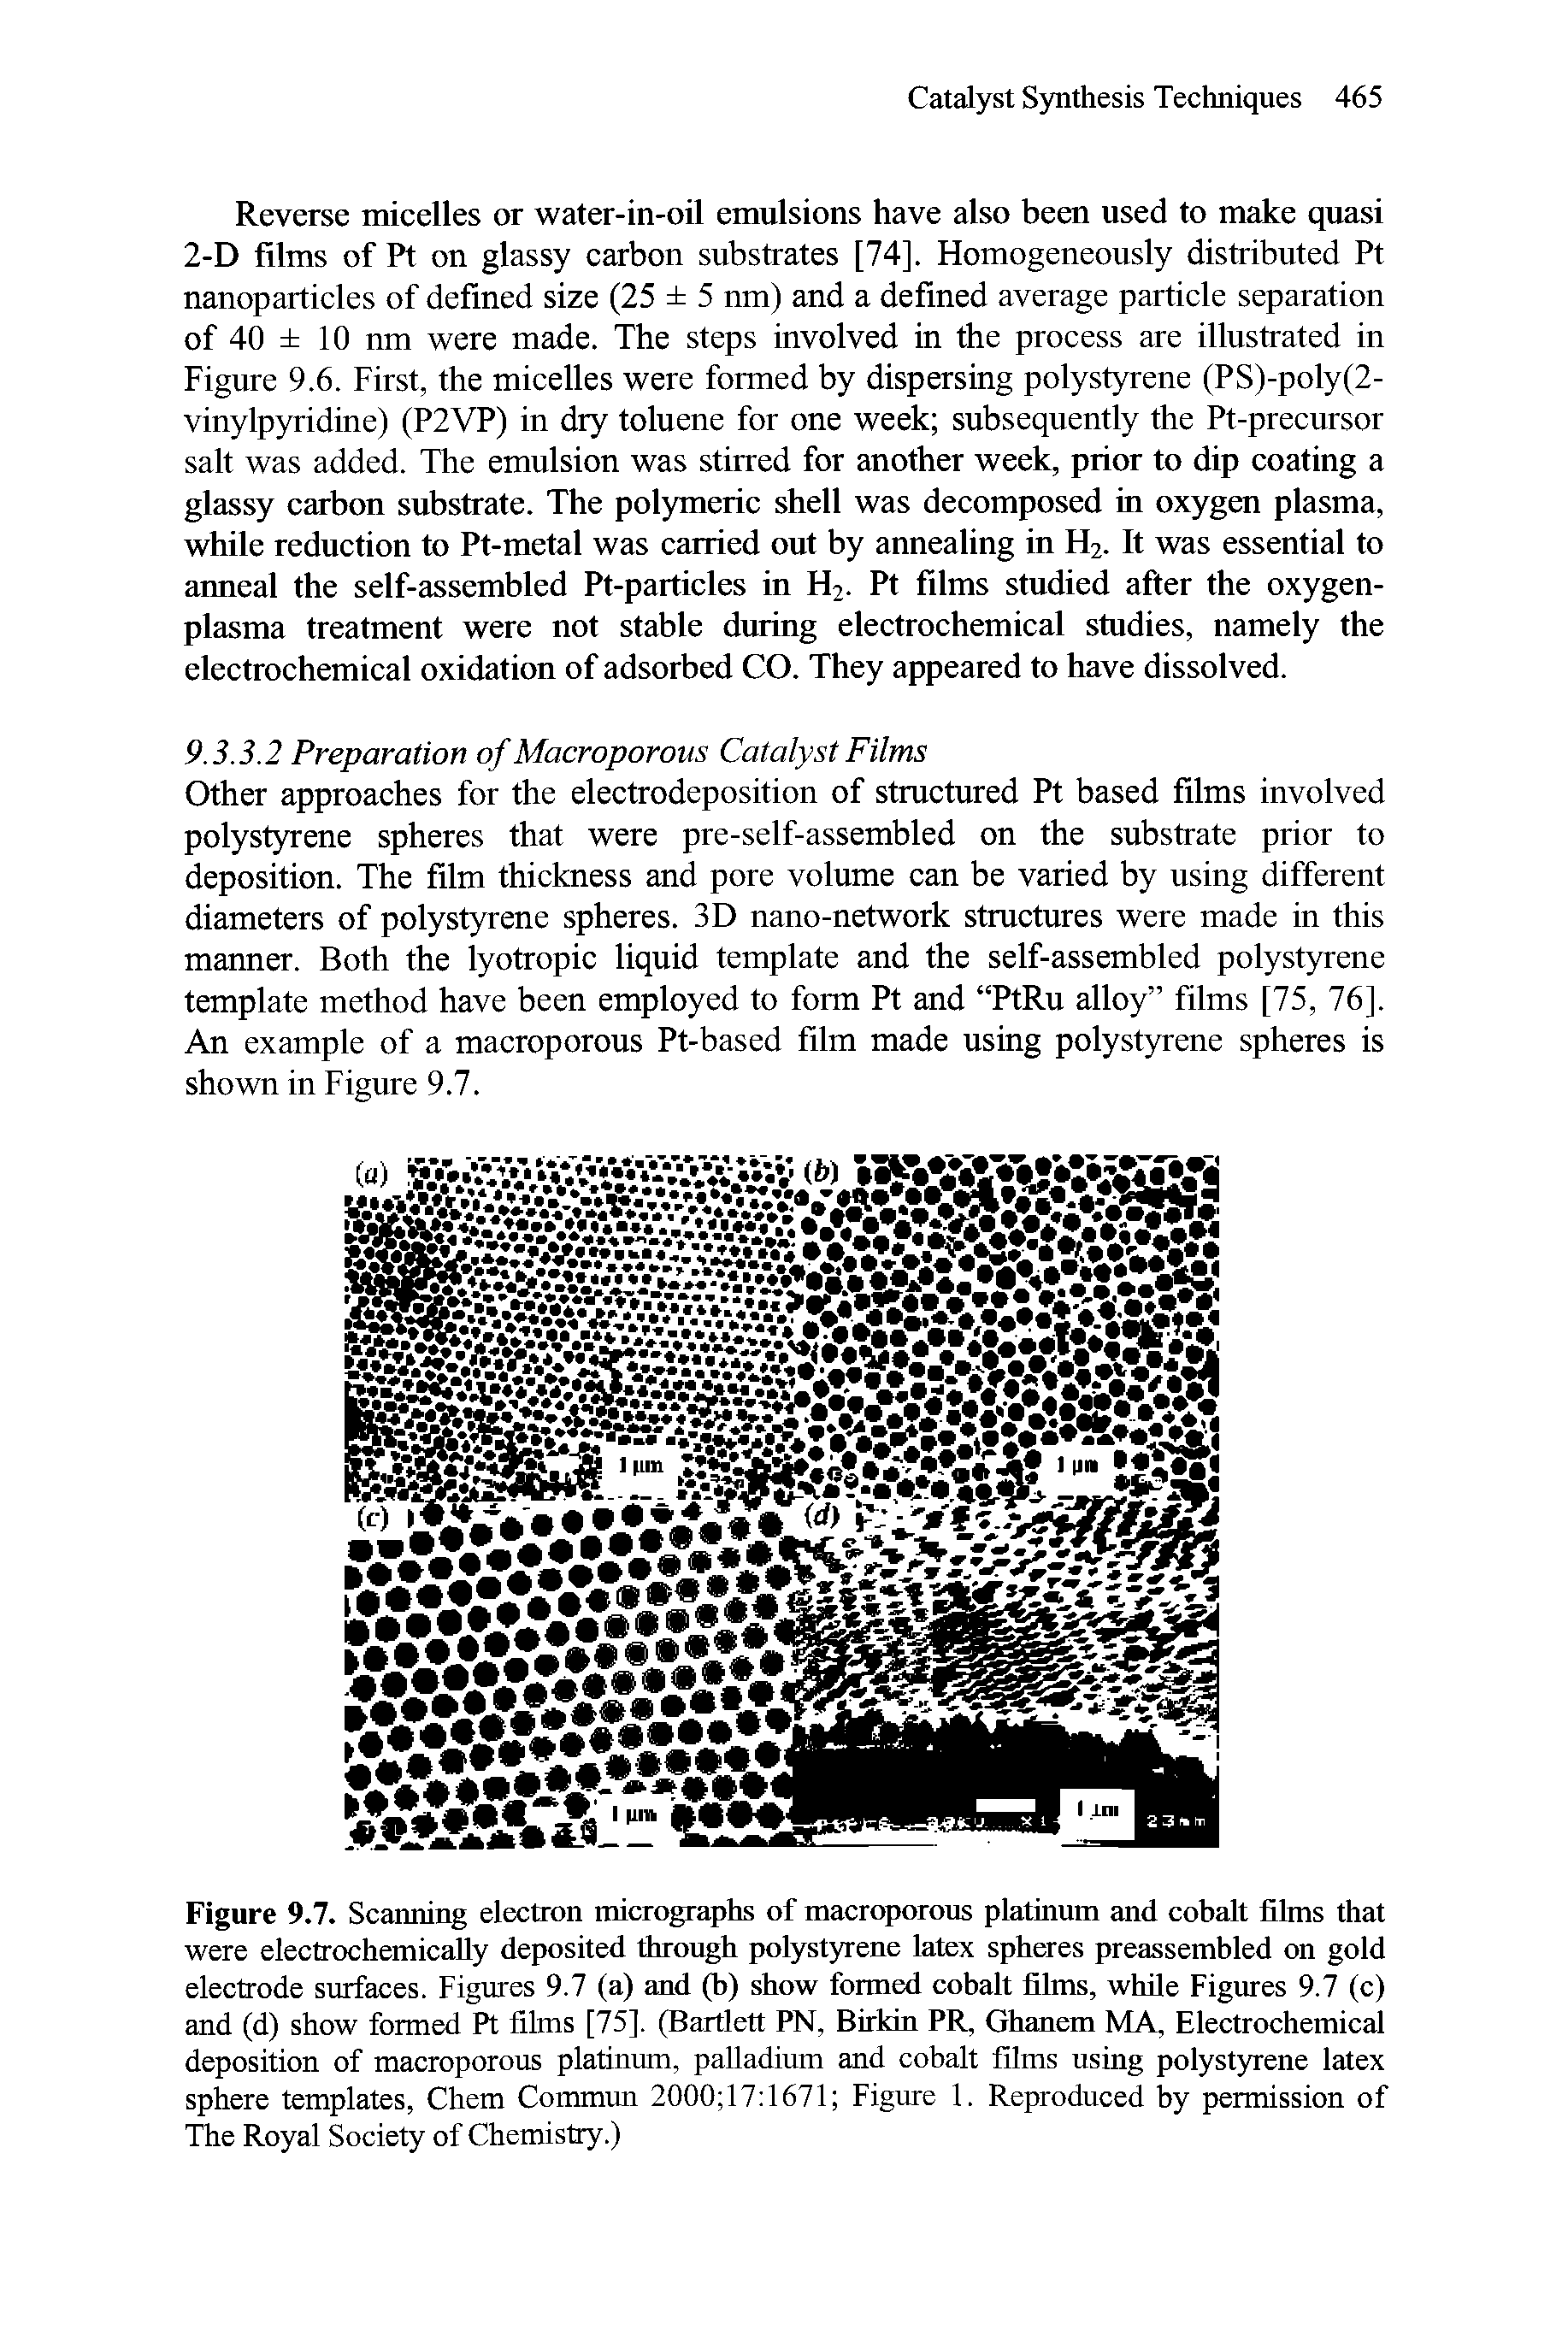 Figure 9.7. Scanning electron micrographs of macroporous platinum and cobalt films that were electrochemicaUy deposited through polystyrene latex spheres preassembled on gold electrode surfaces. Figures 9.7 (a) and (b) show formed cobalt films, while Figures 9.7 (c) and (d) show formed Pt films [75]. (Bartlett PN, Birkin PR, Ghanem MA, Electrochemical deposition of macroporous platinum, palladium and cobalt films using polystyrene latex sphere templates, Chem Commun 2000 17 1671 Figure 1. Reproduced by permission of The Royal Society of Chemistry.)...